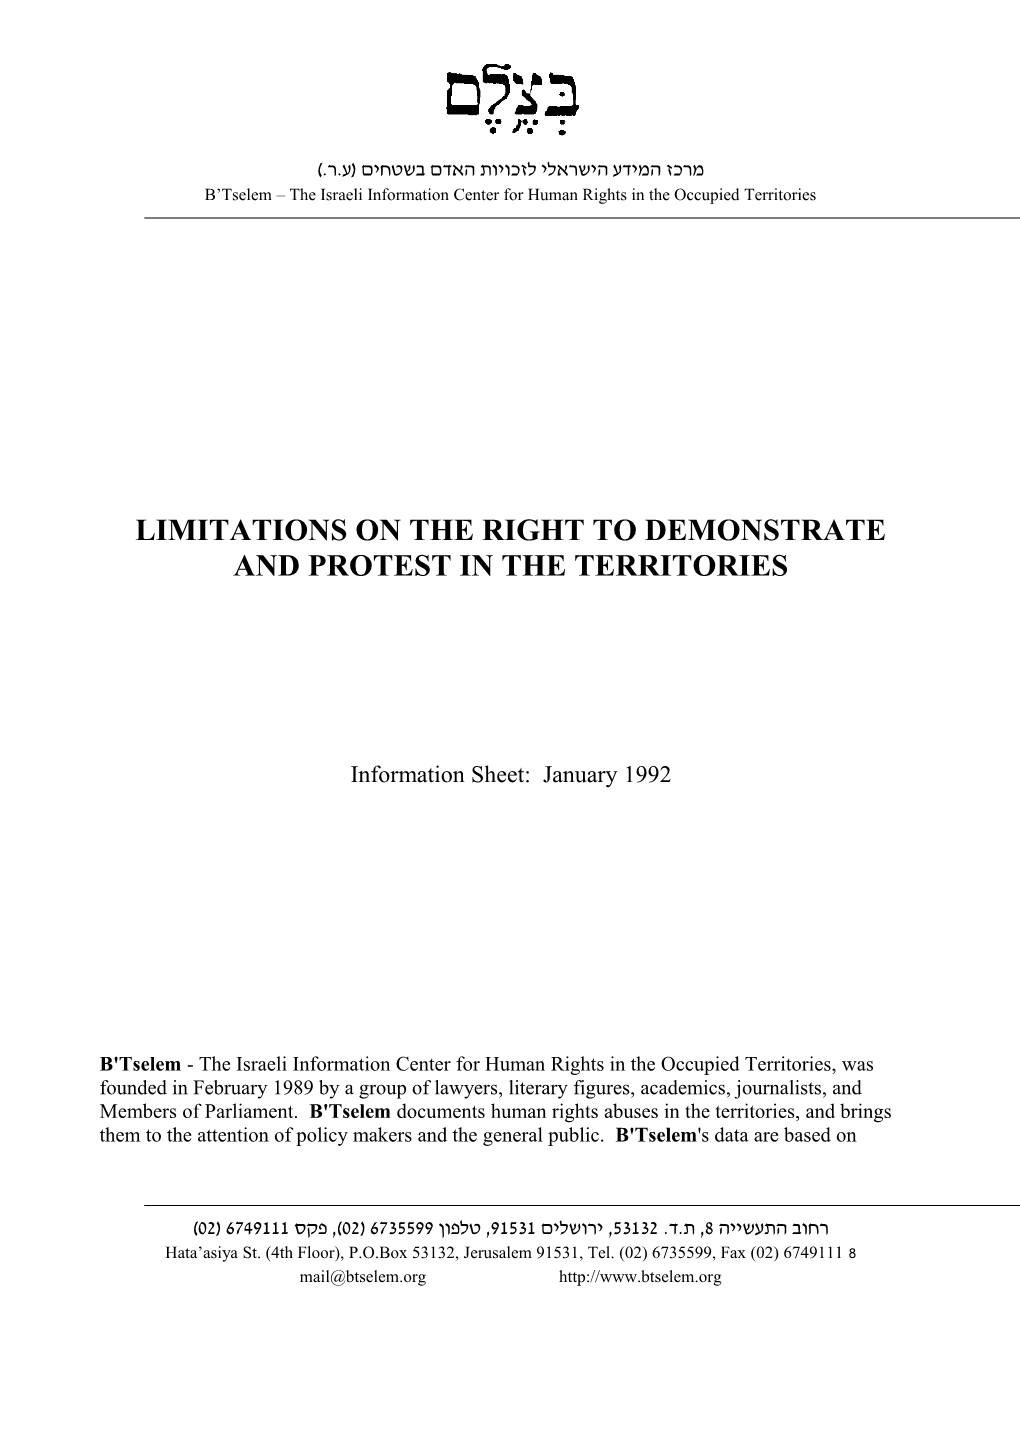 Limitations on the Right to Demonstrate and Protest in the Territories